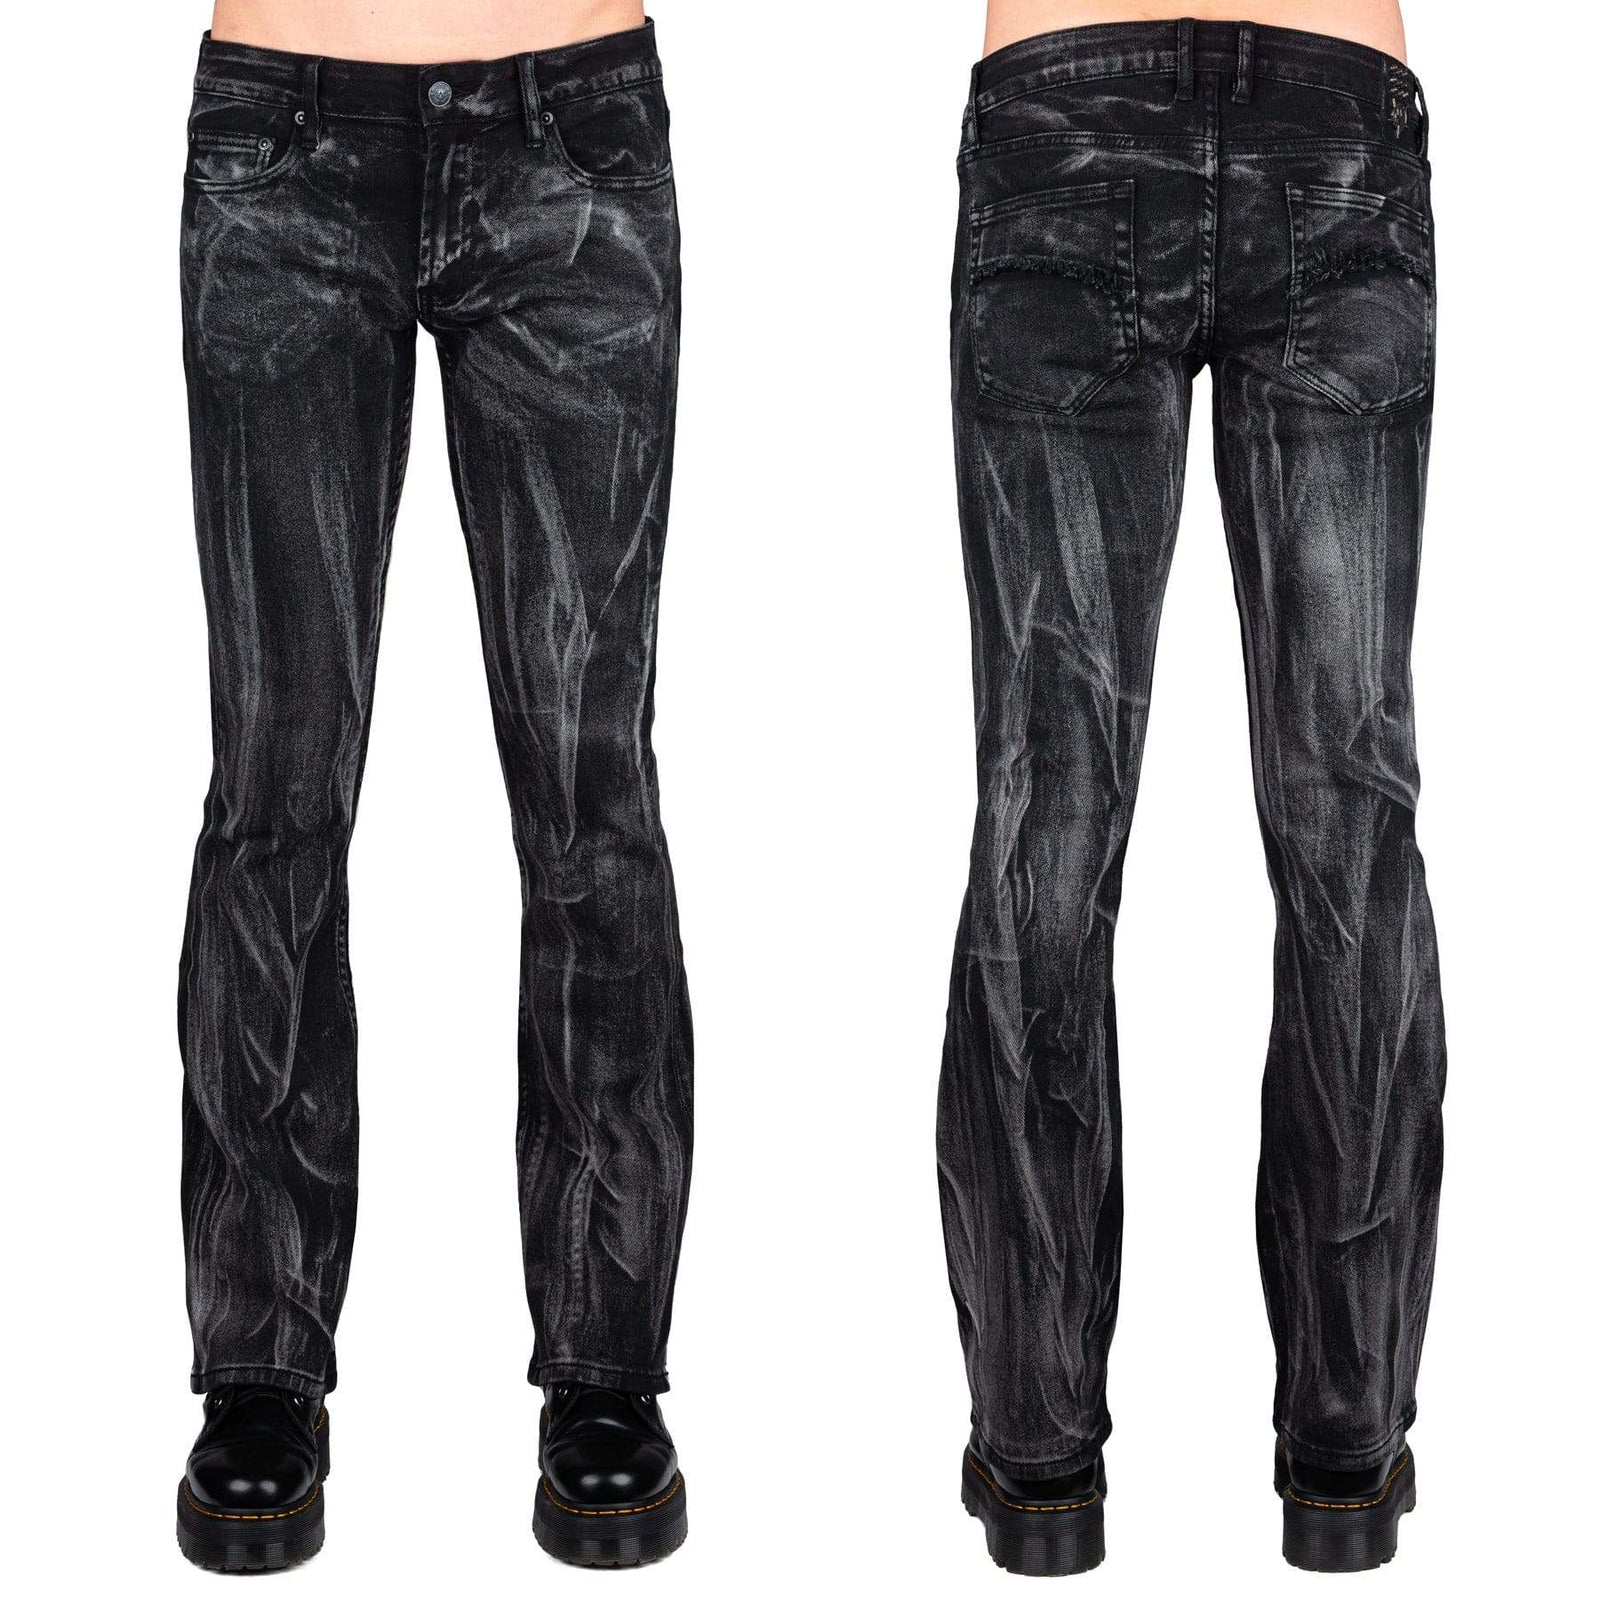 All Access Collection Pants Hellraiser Smoke Wash Jeans - Ready to ship - Size 32